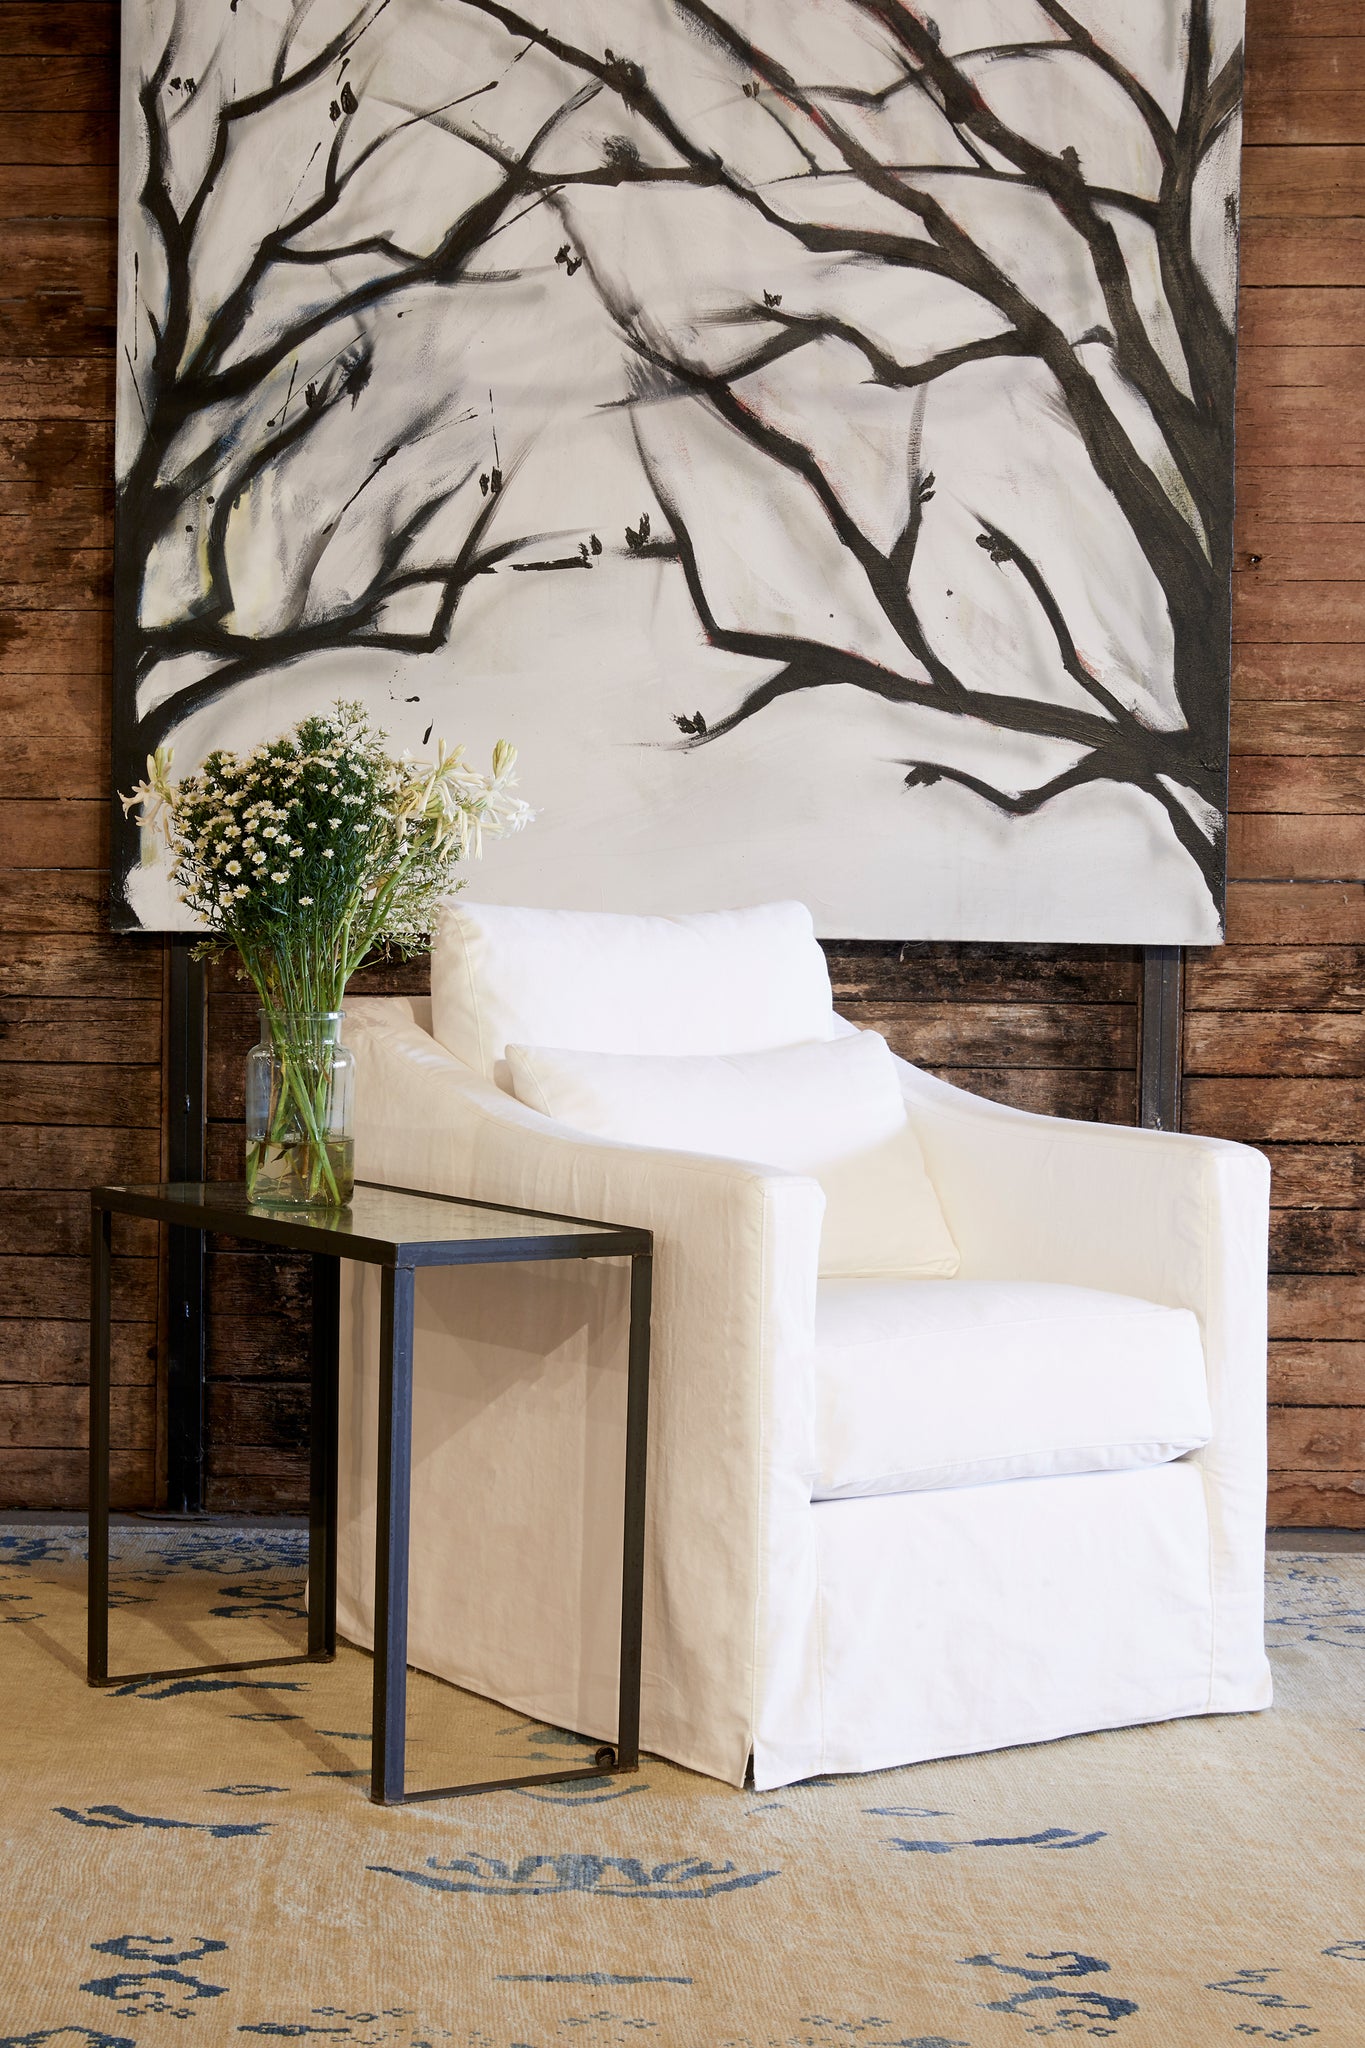  Rebecca chair in Denim White next to a metal side table. In the background is a wood wall with a painting of tree branches. Photographed in Denim White. 